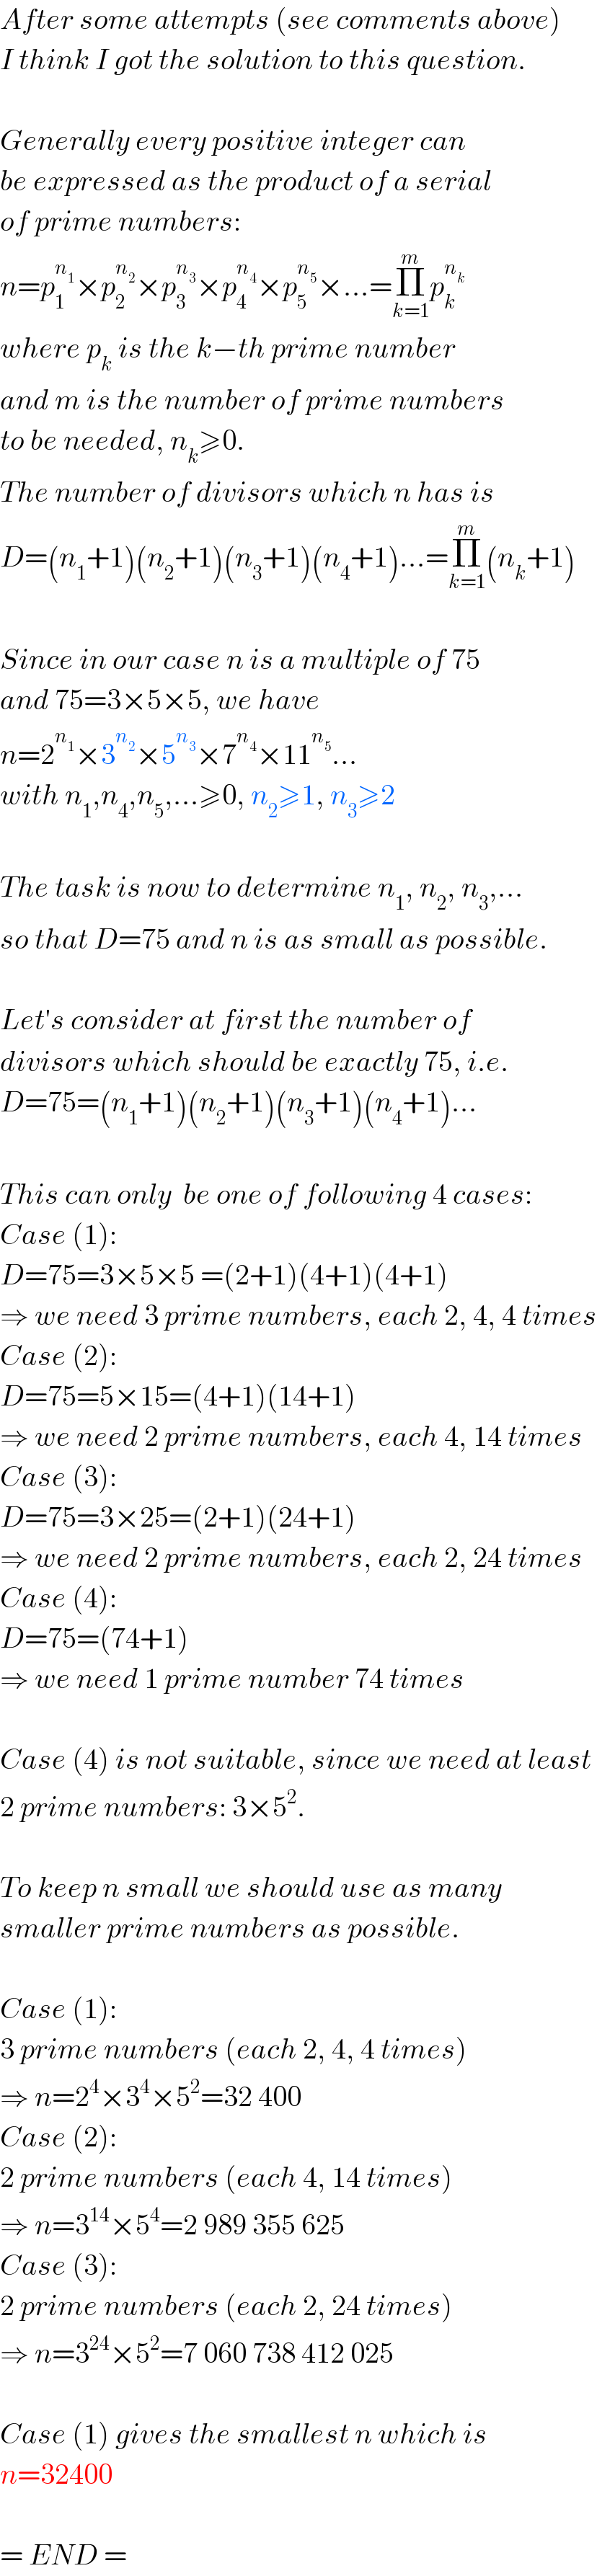 After some attempts (see comments above)  I think I got the solution to this question.    Generally every positive integer can  be expressed as the product of a serial  of prime numbers:  n=p_1 ^n_1  ×p_2 ^n_2  ×p_3 ^n_3  ×p_4 ^n_4  ×p_5 ^n_5  ×...=Π_(k=1) ^m p_k ^n_k    where p_k  is the k−th prime number  and m is the number of prime numbers  to be needed, n_k ≥0.  The number of divisors which n has is  D=(n_1 +1)(n_2 +1)(n_3 +1)(n_4 +1)...=Π_(k=1) ^m (n_k +1)    Since in our case n is a multiple of 75  and 75=3×5×5, we have   n=2^n_1  ×3^n_2  ×5^n_3  ×7^n_4  ×11^n_5  ...  with n_1 ,n_4 ,n_5 ,...≥0, n_2 ≥1, n_3 ≥2    The task is now to determine n_1 , n_2 , n_3 ,...  so that D=75 and n is as small as possible.    Let′s consider at first the number of  divisors which should be exactly 75, i.e.  D=75=(n_1 +1)(n_2 +1)(n_3 +1)(n_4 +1)...    This can only  be one of following 4 cases:  Case (1):  D=75=3×5×5 =(2+1)(4+1)(4+1)  ⇒ we need 3 prime numbers, each 2, 4, 4 times  Case (2):  D=75=5×15=(4+1)(14+1)   ⇒ we need 2 prime numbers, each 4, 14 times  Case (3):  D=75=3×25=(2+1)(24+1)   ⇒ we need 2 prime numbers, each 2, 24 times  Case (4):  D=75=(74+1)  ⇒ we need 1 prime number 74 times    Case (4) is not suitable, since we need at least  2 prime numbers: 3×5^2 .    To keep n small we should use as many  smaller prime numbers as possible.    Case (1):   3 prime numbers (each 2, 4, 4 times)  ⇒ n=2^4 ×3^4 ×5^2 =32 400  Case (2):   2 prime numbers (each 4, 14 times)  ⇒ n=3^(14) ×5^4 =2 989 355 625  Case (3):   2 prime numbers (each 2, 24 times)  ⇒ n=3^(24) ×5^2 =7 060 738 412 025    Case (1) gives the smallest n which is  n=32400    = END =  